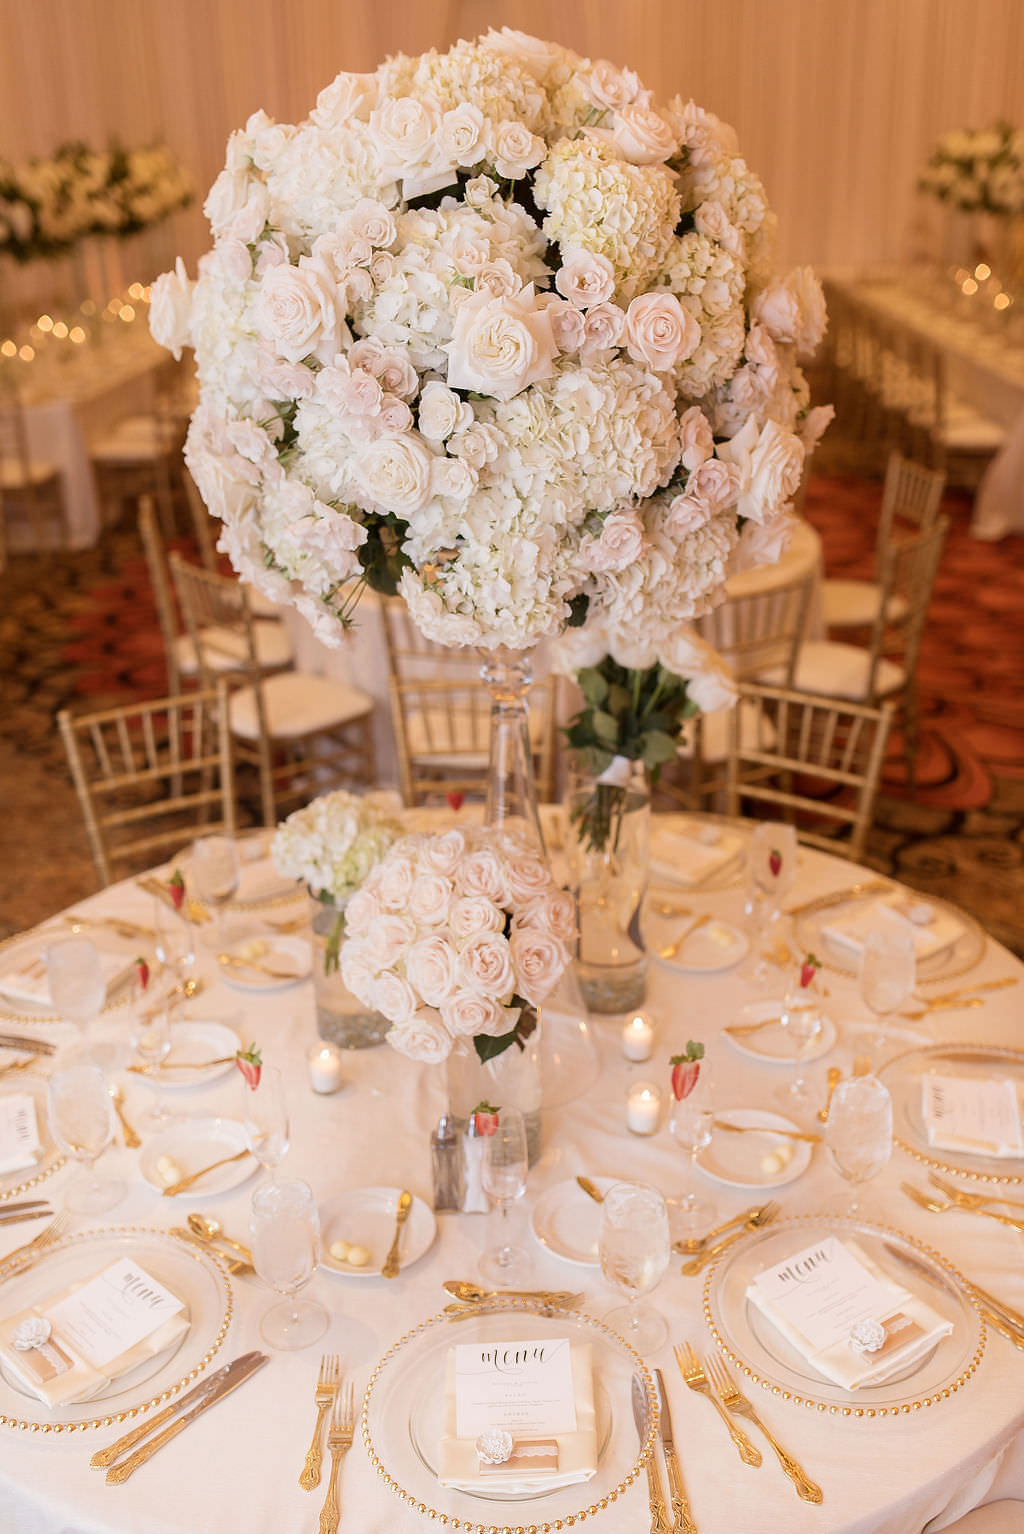 Elegant Romantic Classic Wedding Reception Decor, Lush White, Ivory and Blush Pink Floral Centerpiece on Clear Glass Vase, Round Table with White Linen, Clear Glass and Gold Beaded Rim Chargers and Gold Silverware | Tampa Bay Wedding Photographer Kristen Marie Photography | Clearwater Beach Wedding Florist, Rentals, Linens Gabro Event Services | Wedding Day of Coordinator Special Moments Event Planning